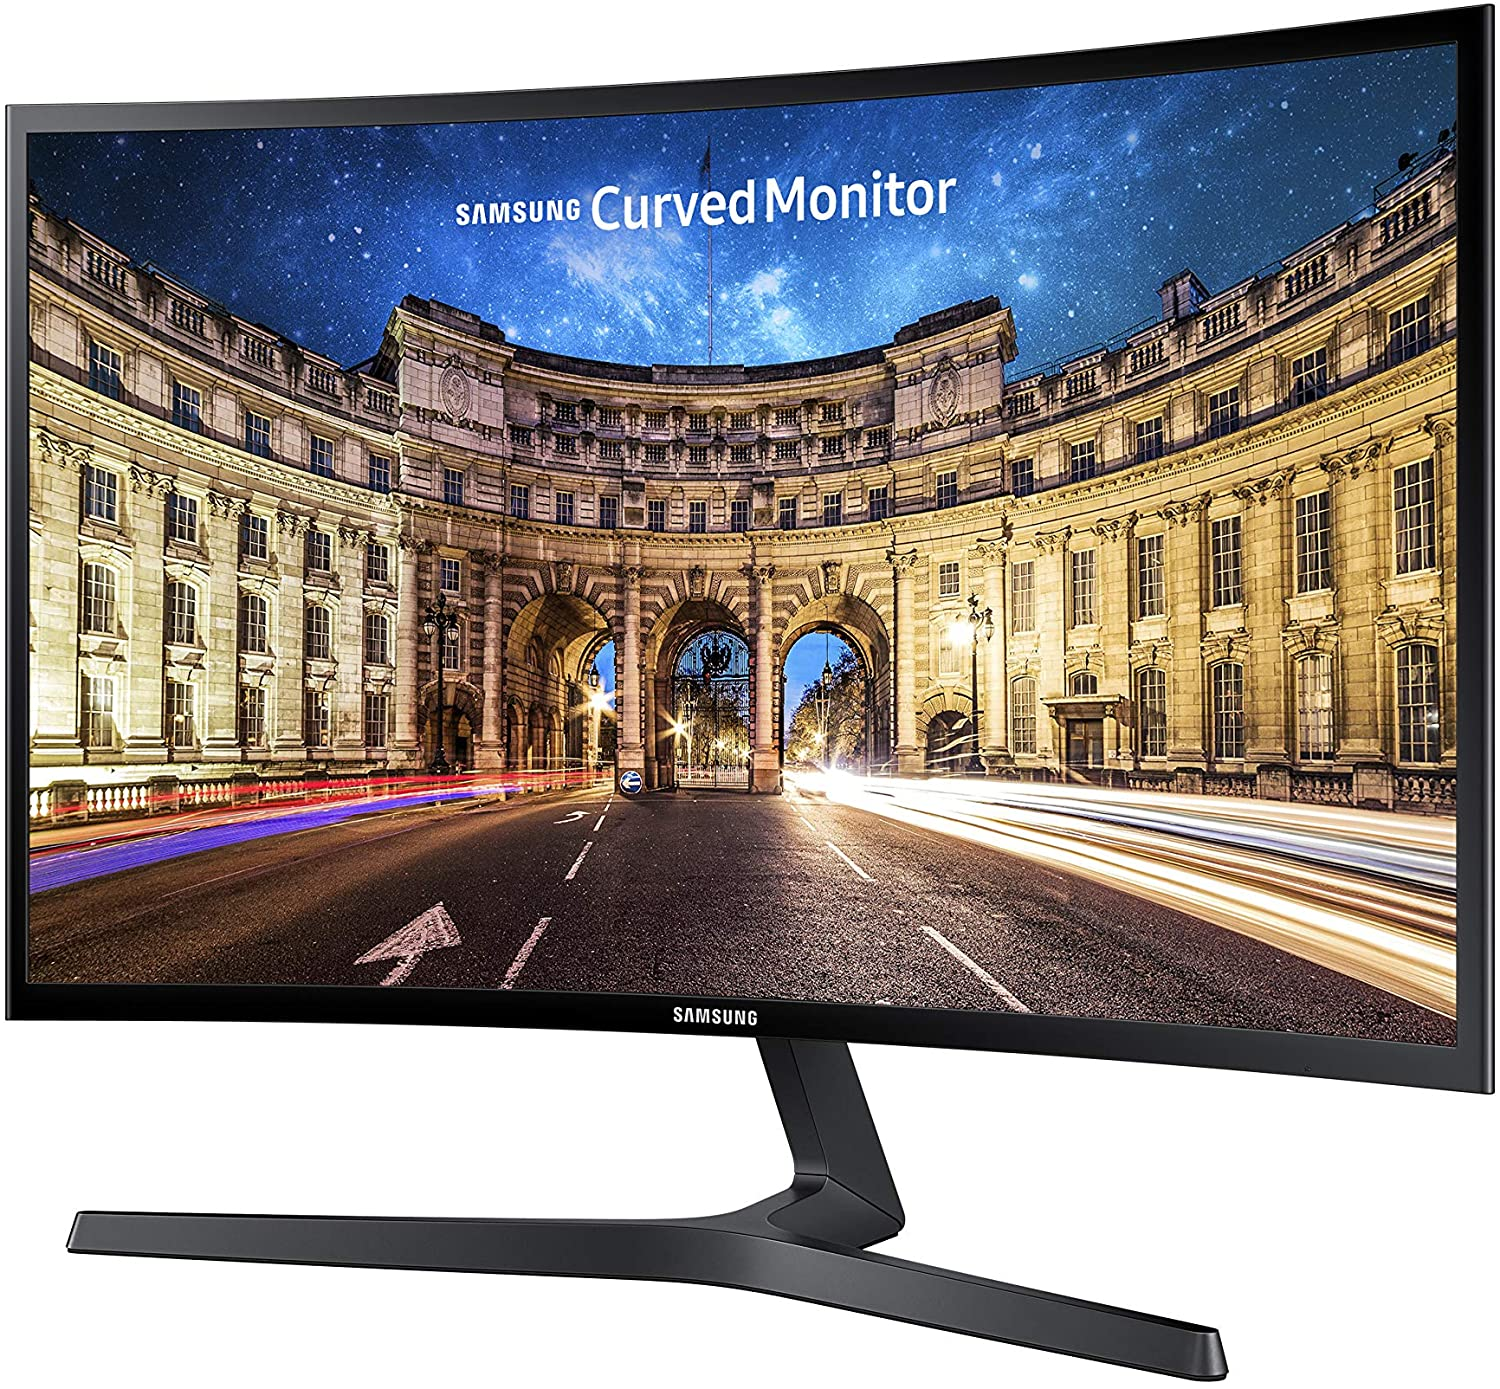 Samsung 24 inch Curved Monitor 1080p, black $139.99